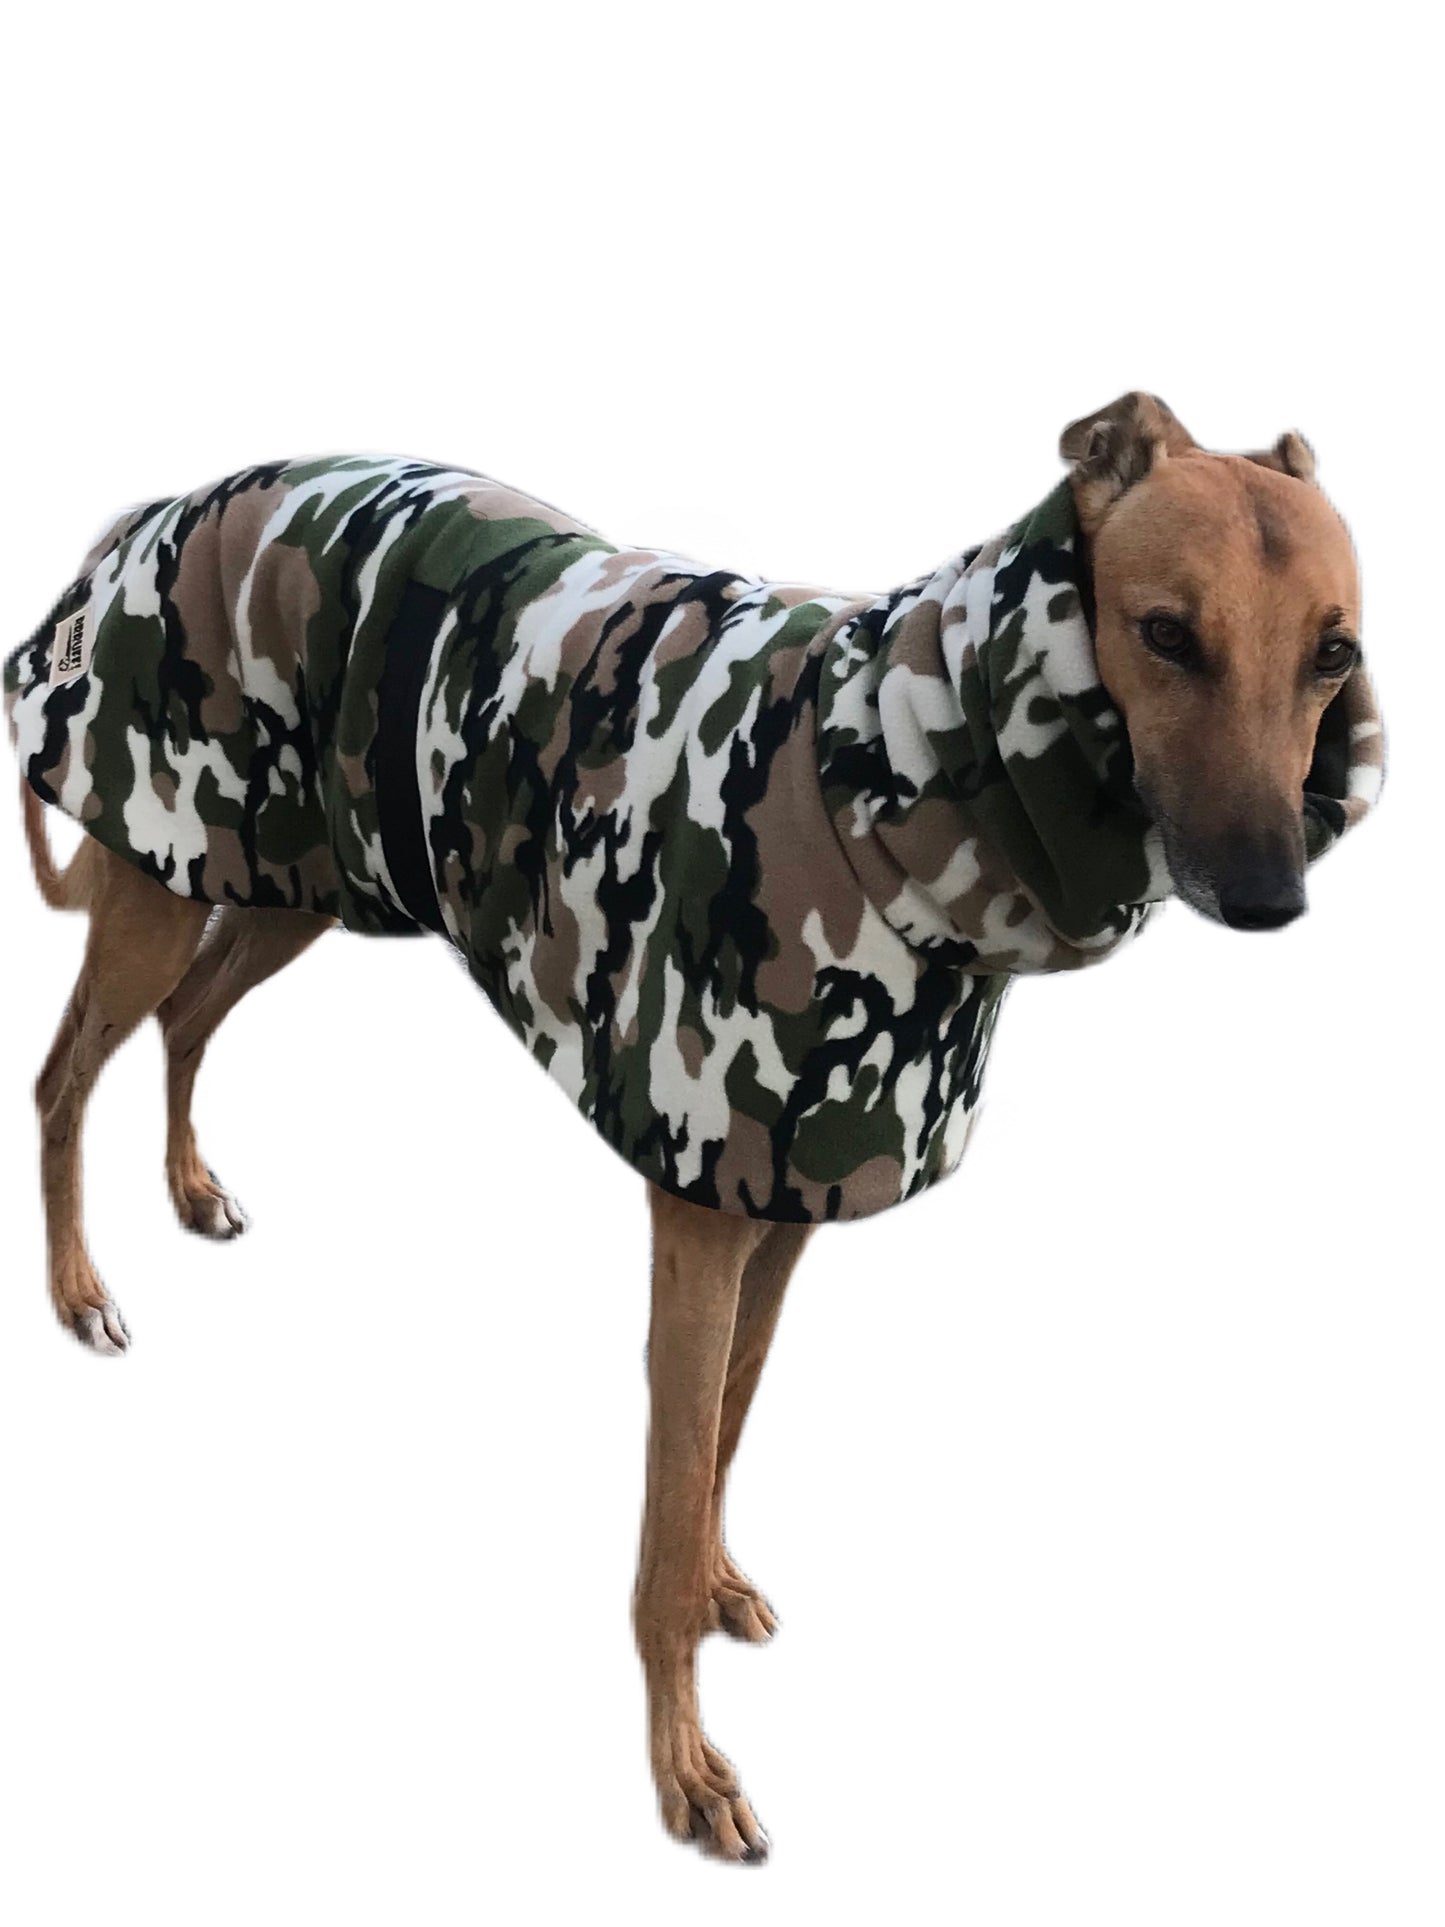 Cammo green print deluxe style greyhound coat camouflage Sherpa lined double polar fleece washable